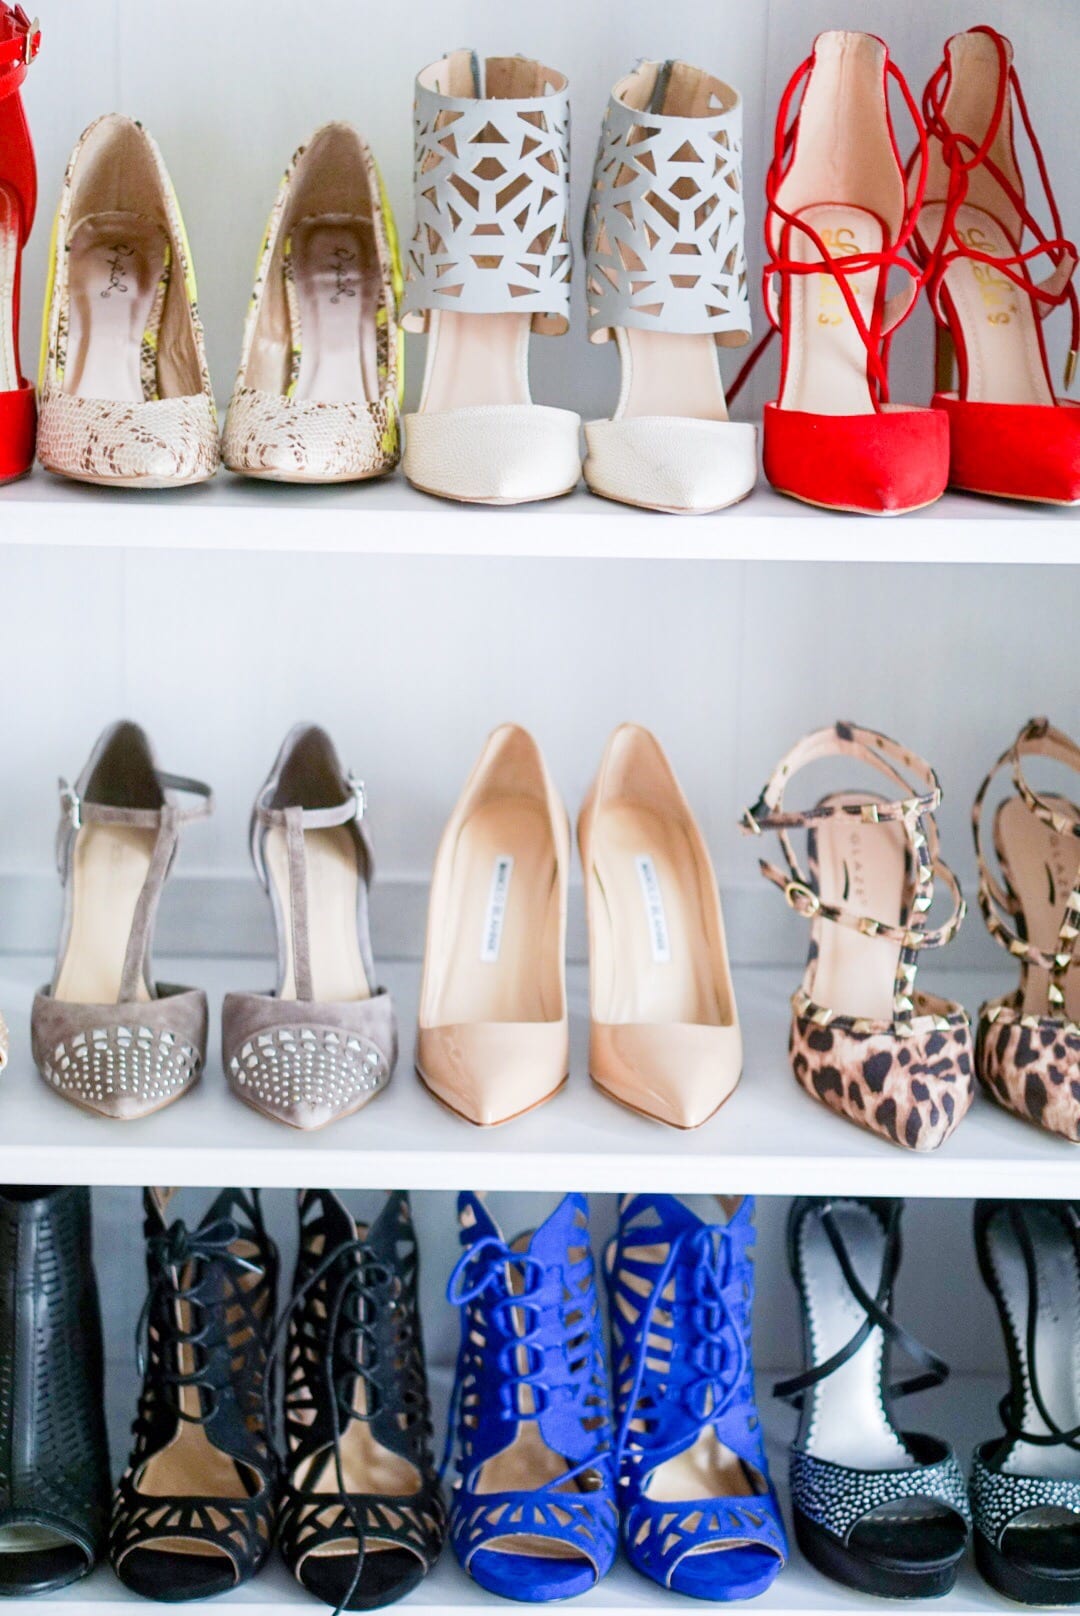 3 Things to Consider When Buying Designer Shoes